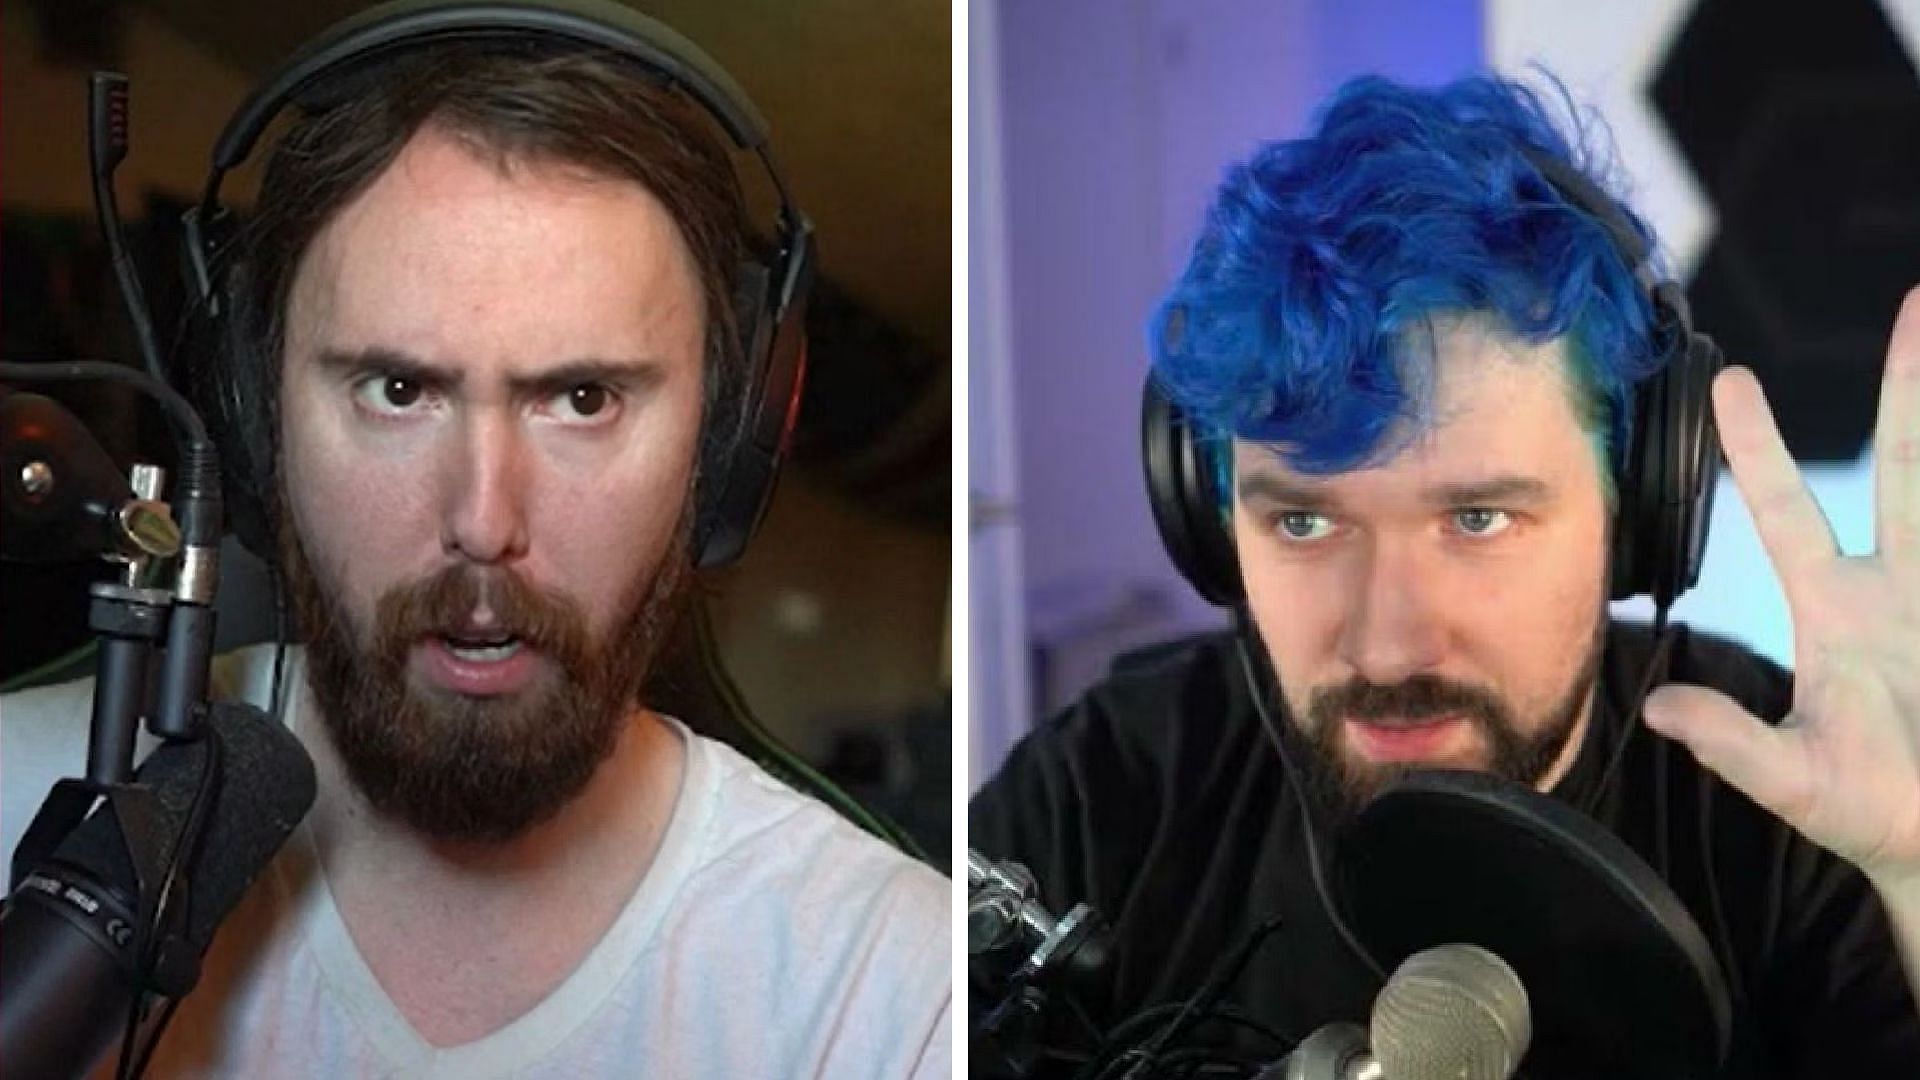 Asmongold wants Twitch to unban Destiny (Image via Asmongold/Twitch, Destiny/YouTube)